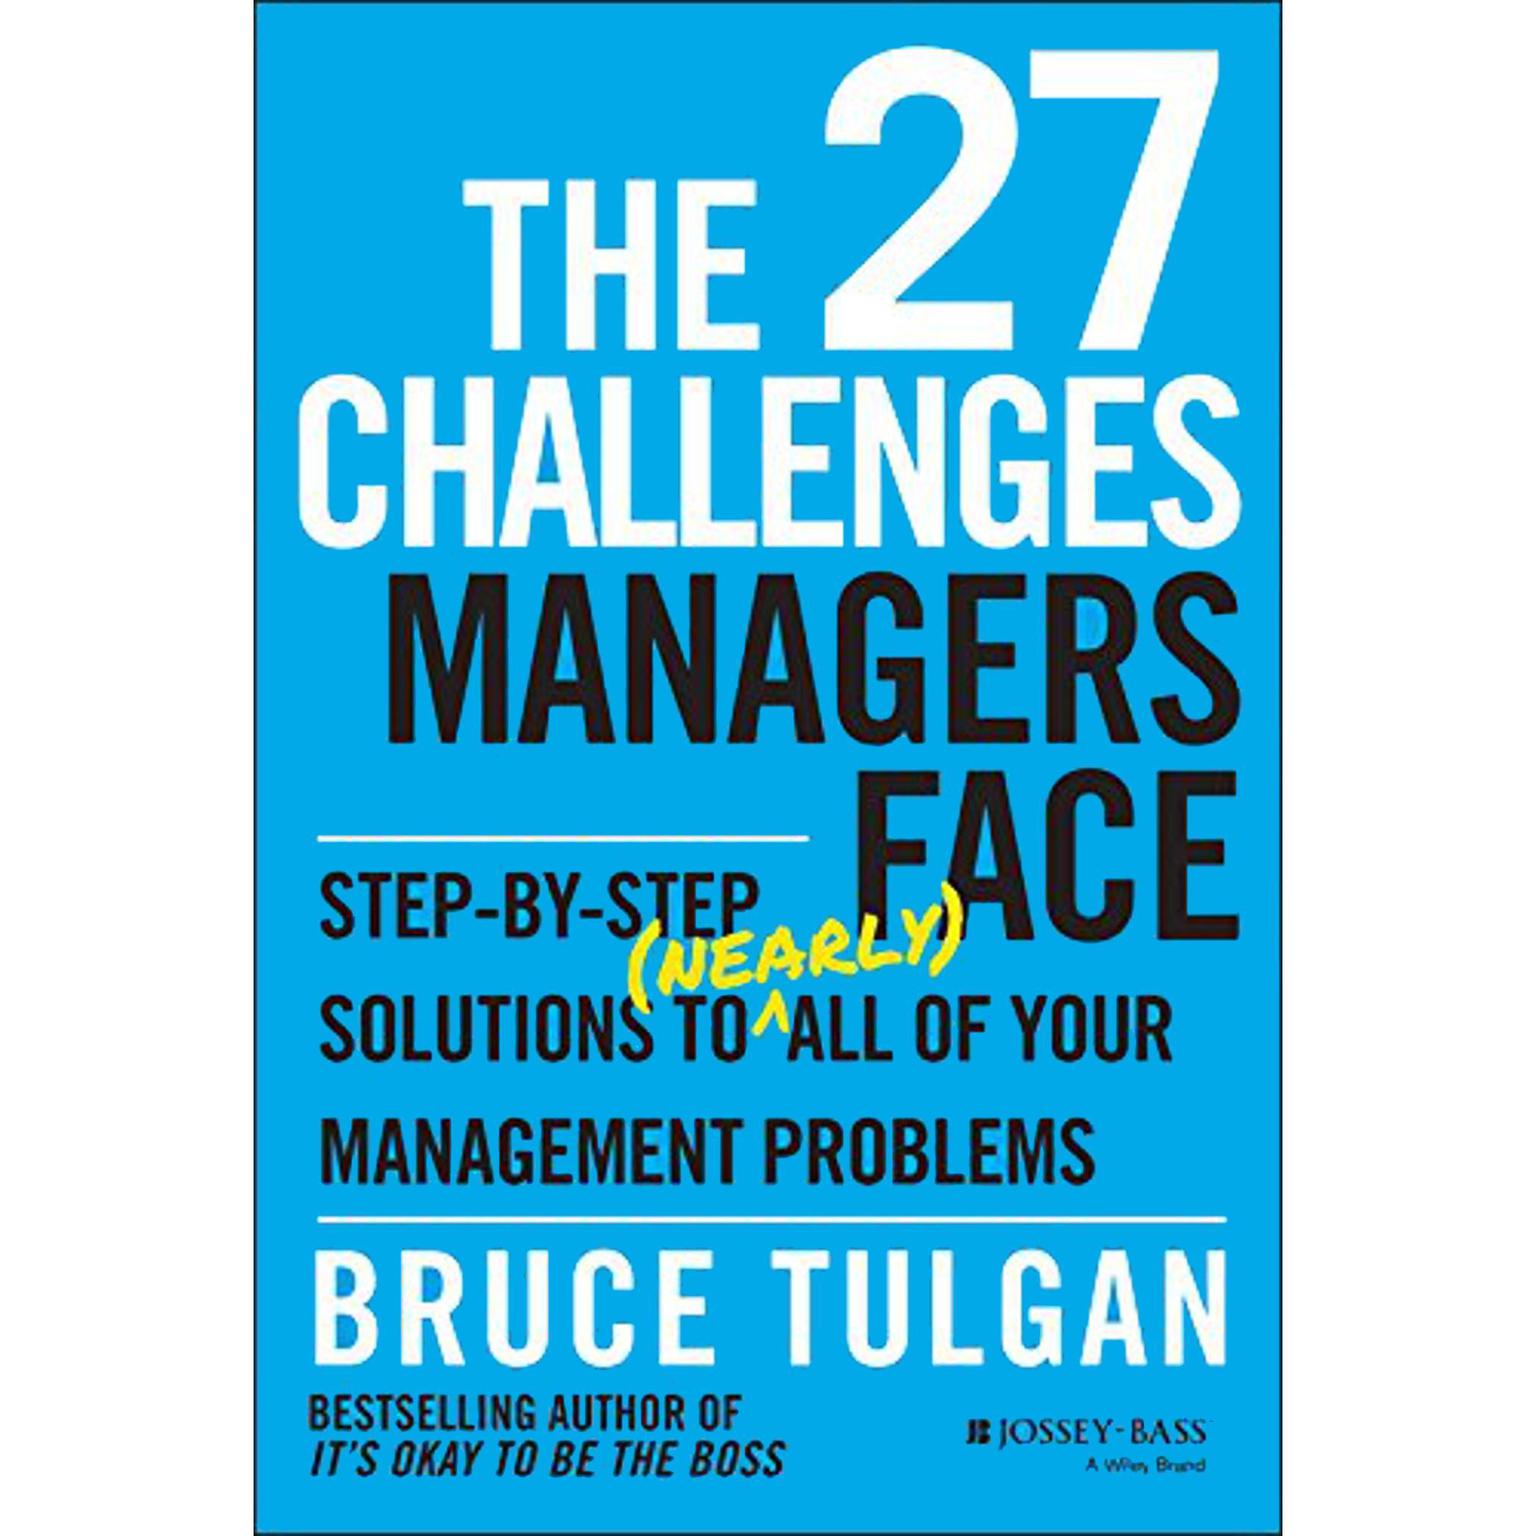 The 27 Challenges Managers Face: Step-by-Step Solutions to (Nearly) All of Your Management Problems Audiobook, by Bruce Tulgan